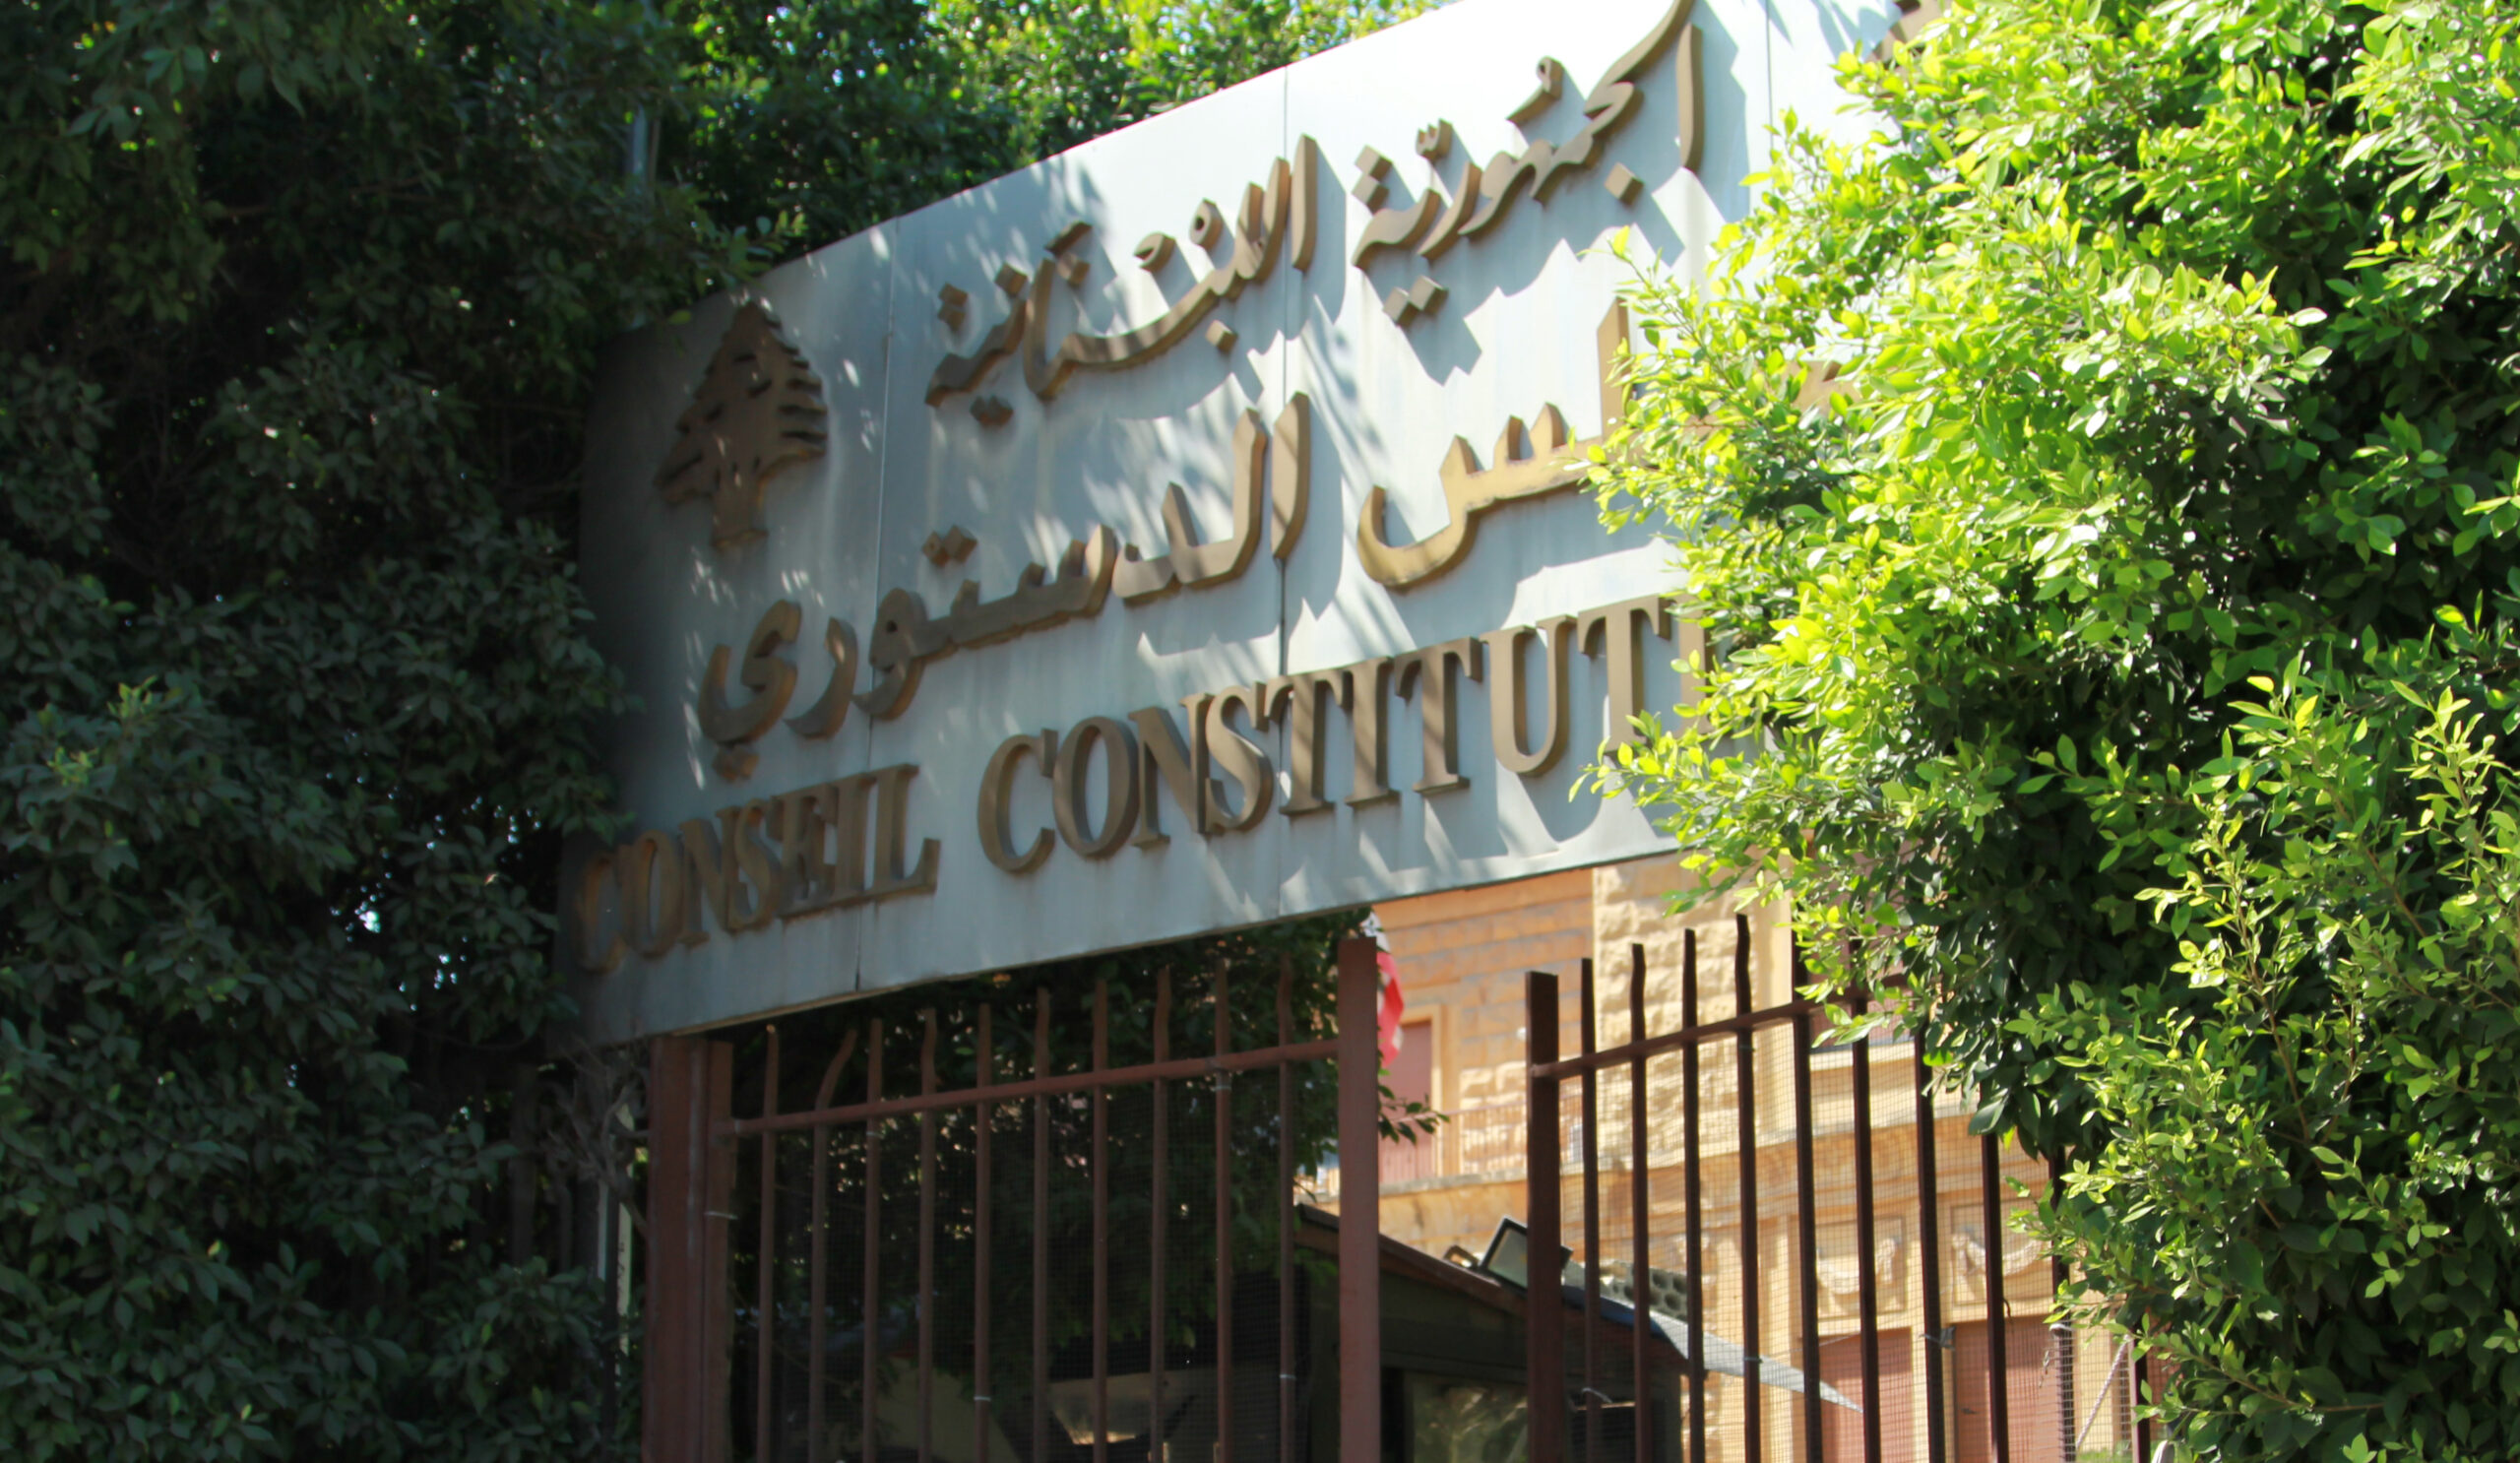 Lebanese Ruling: The Constitution is sovereign, not Parliament